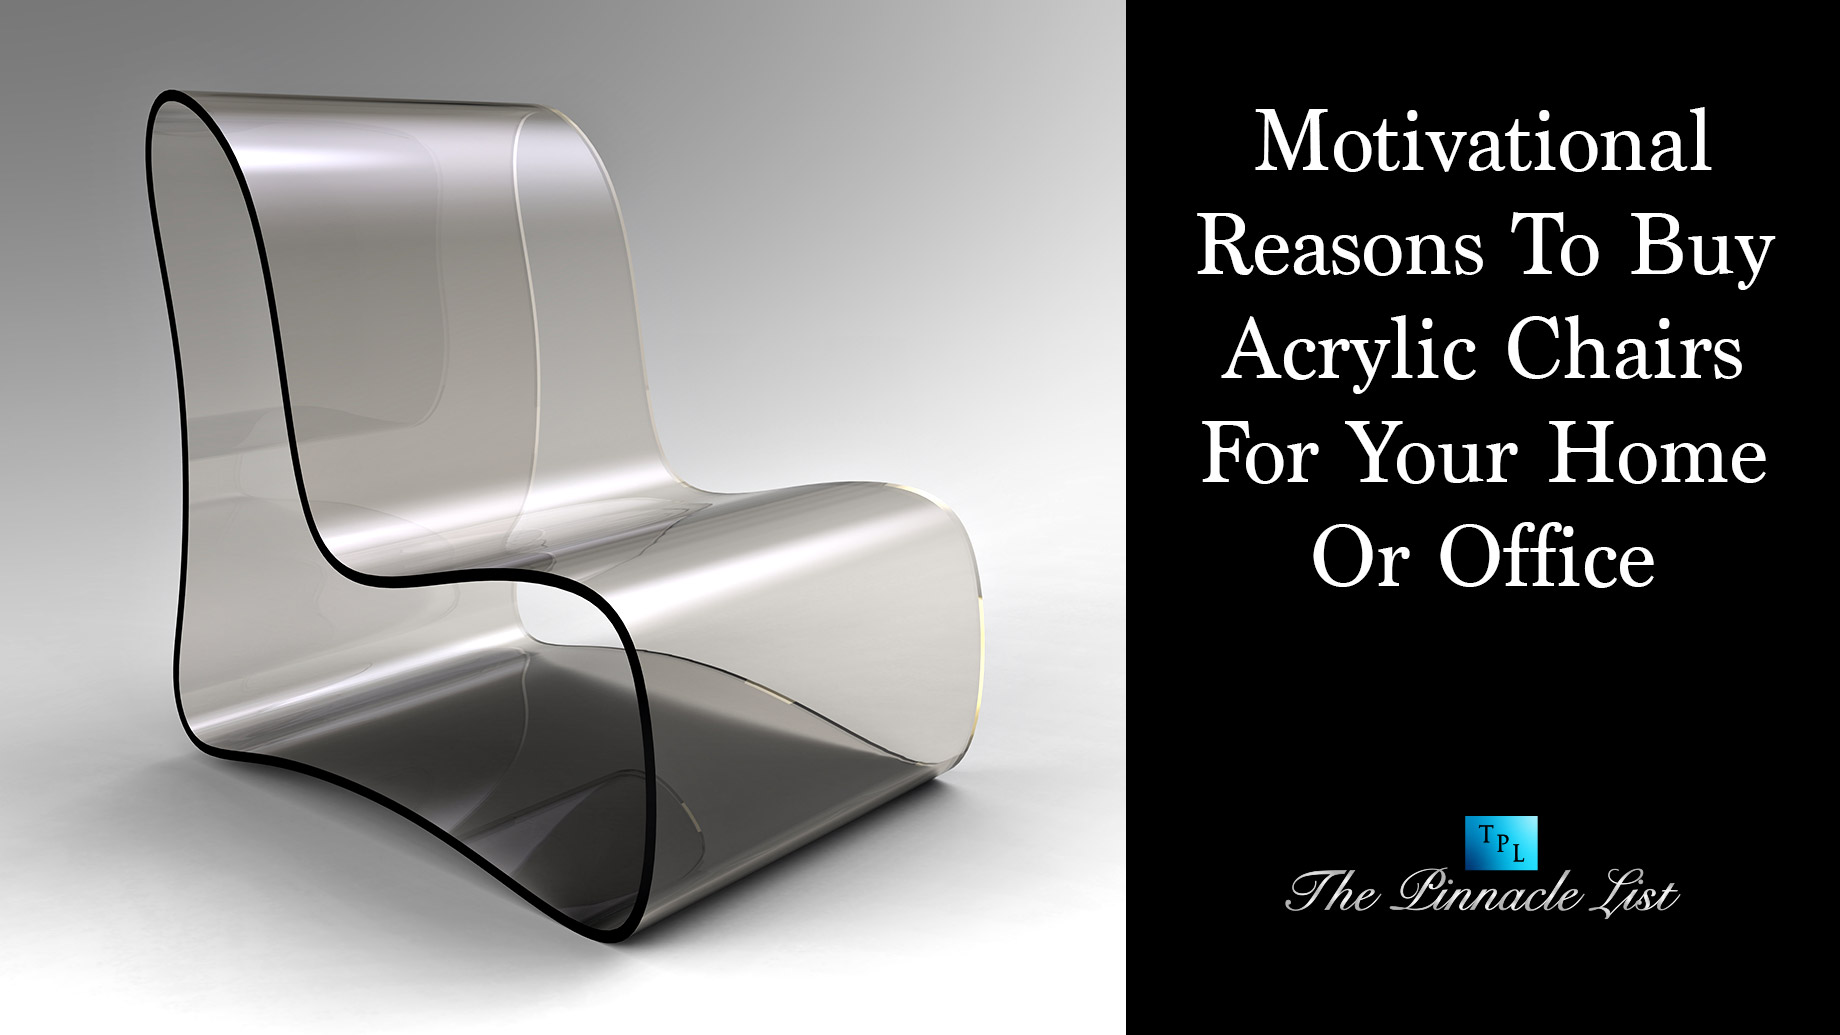 Motivational Reasons To Buy Acrylic Chairs For Your Home Or Office